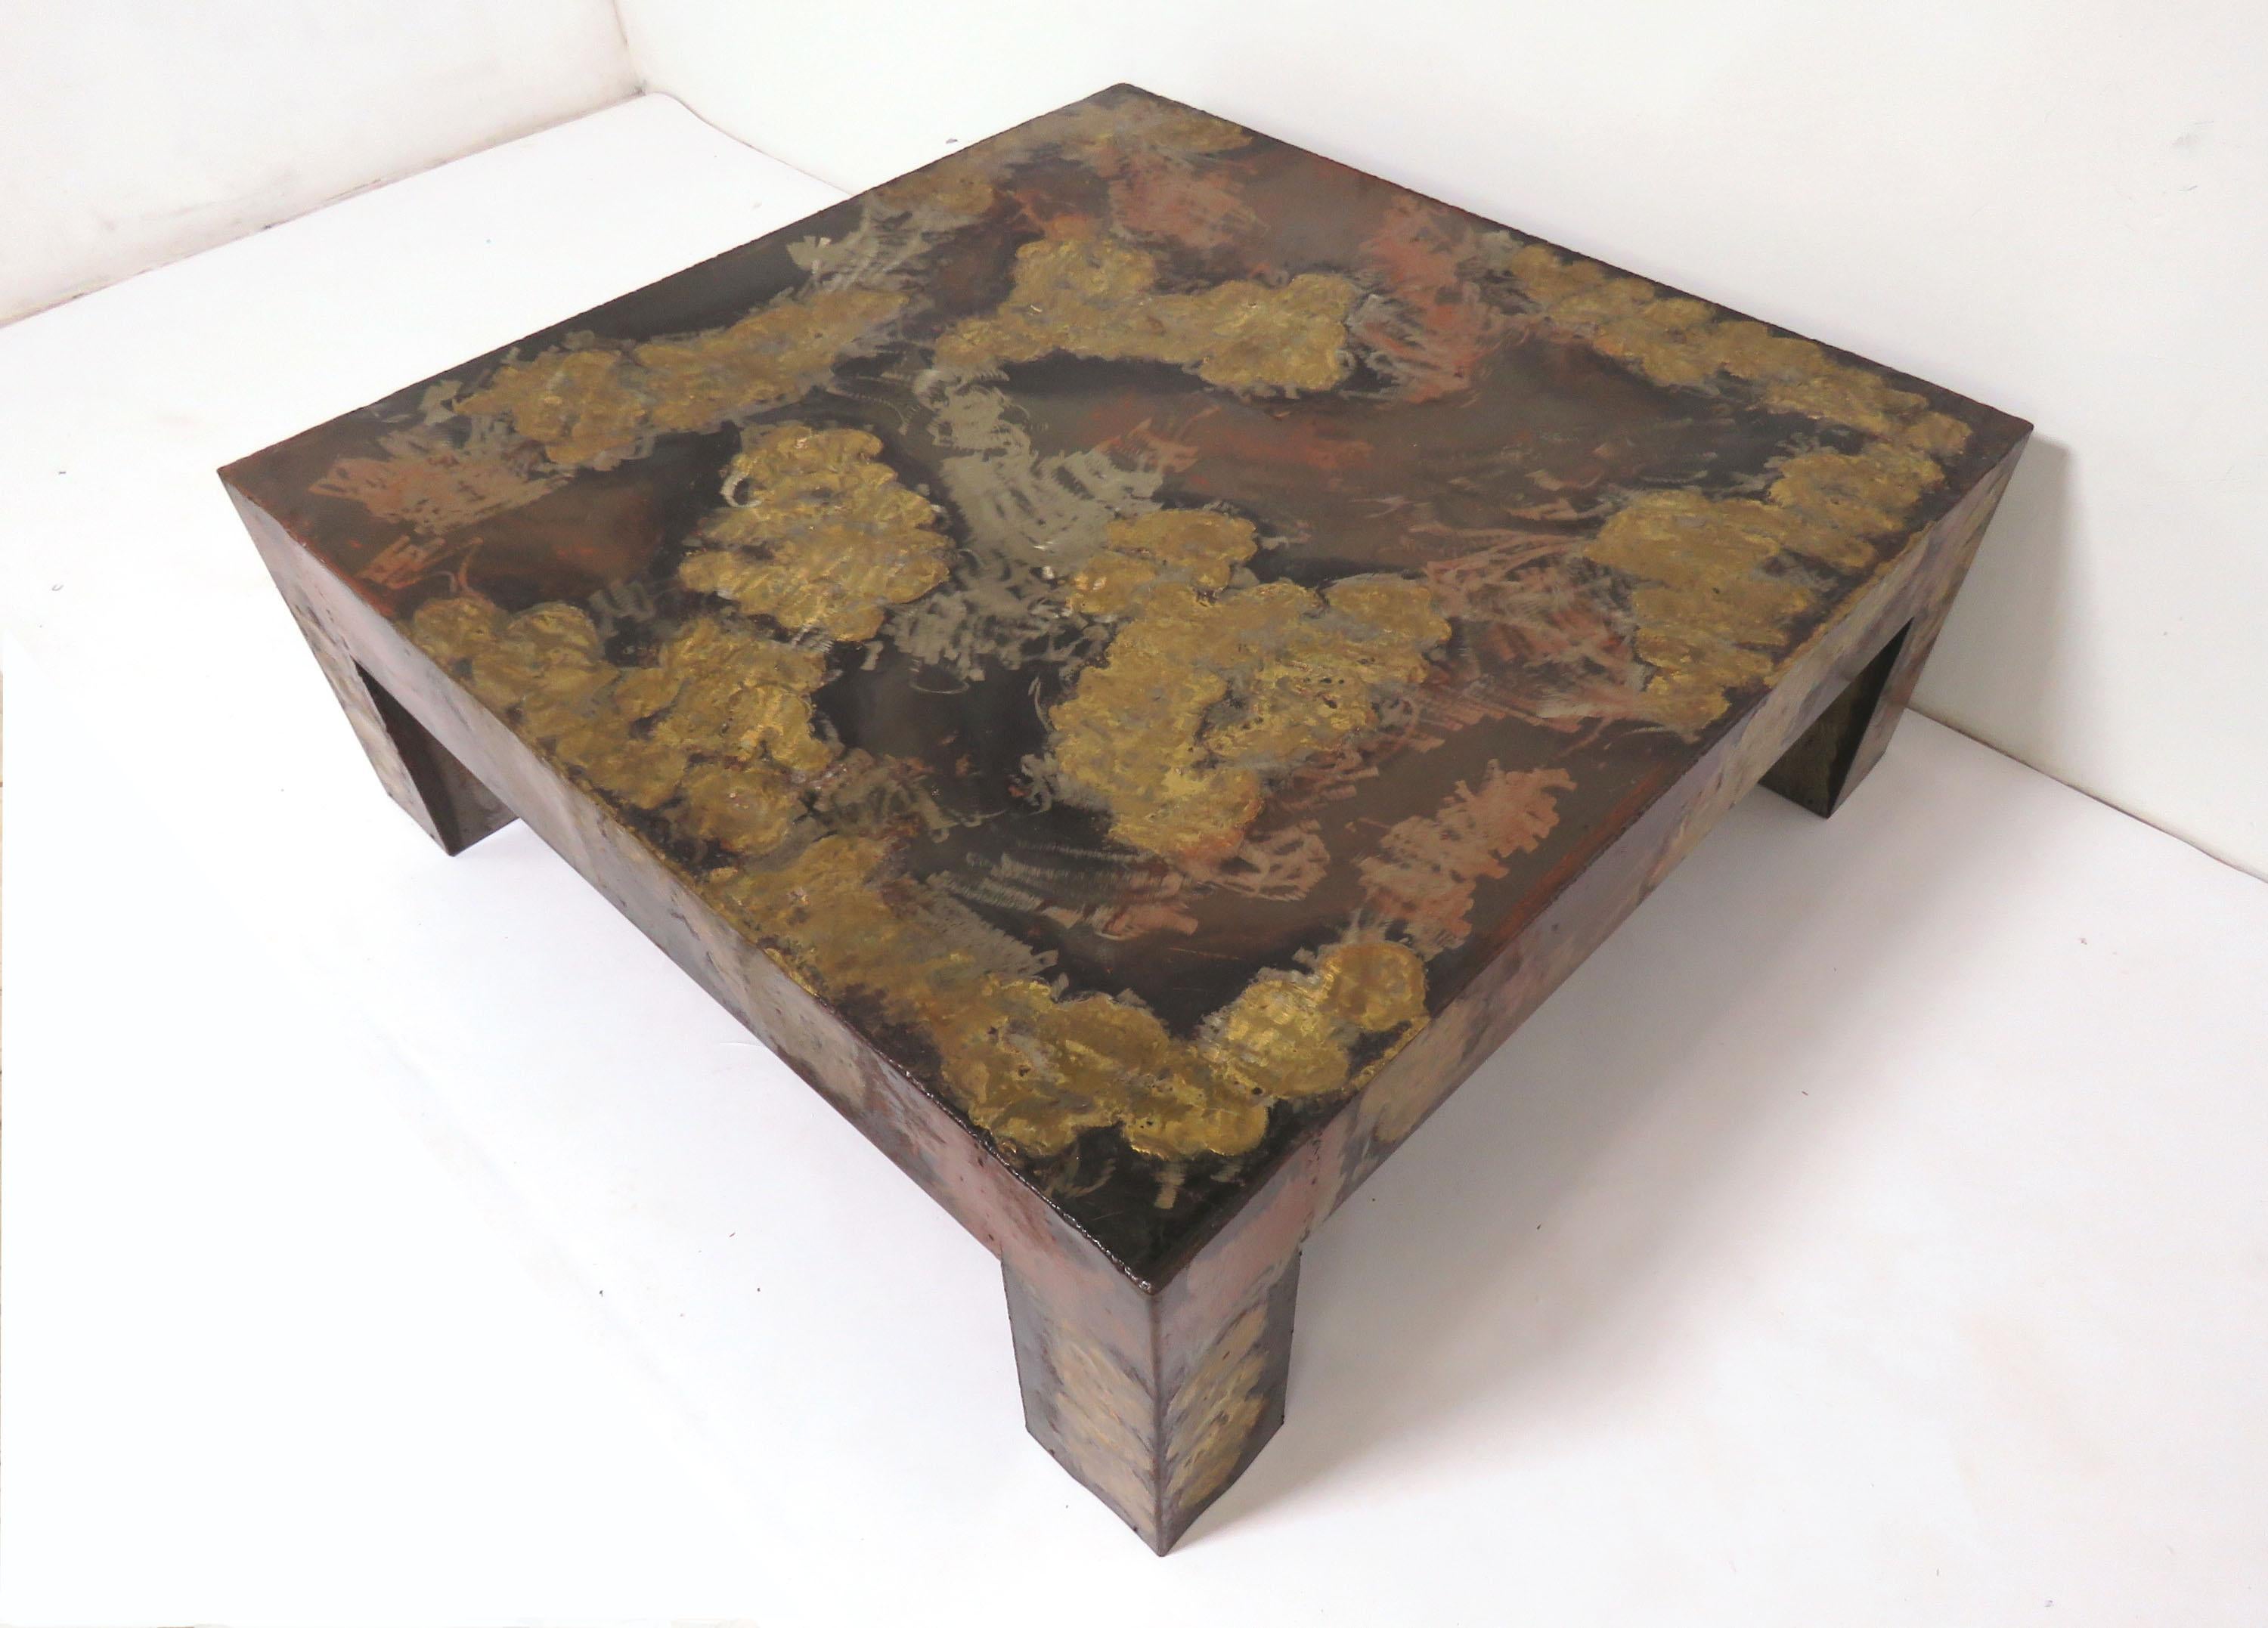 Brutalist Parsons style coffee table in patinated metal, in the manner of Paul Evans, circa 1960s.

Obtained from the original owner, who purchased the table in 1968, anecdotally from a sculptor/metal artist in the Hartford, CT area. Due to its